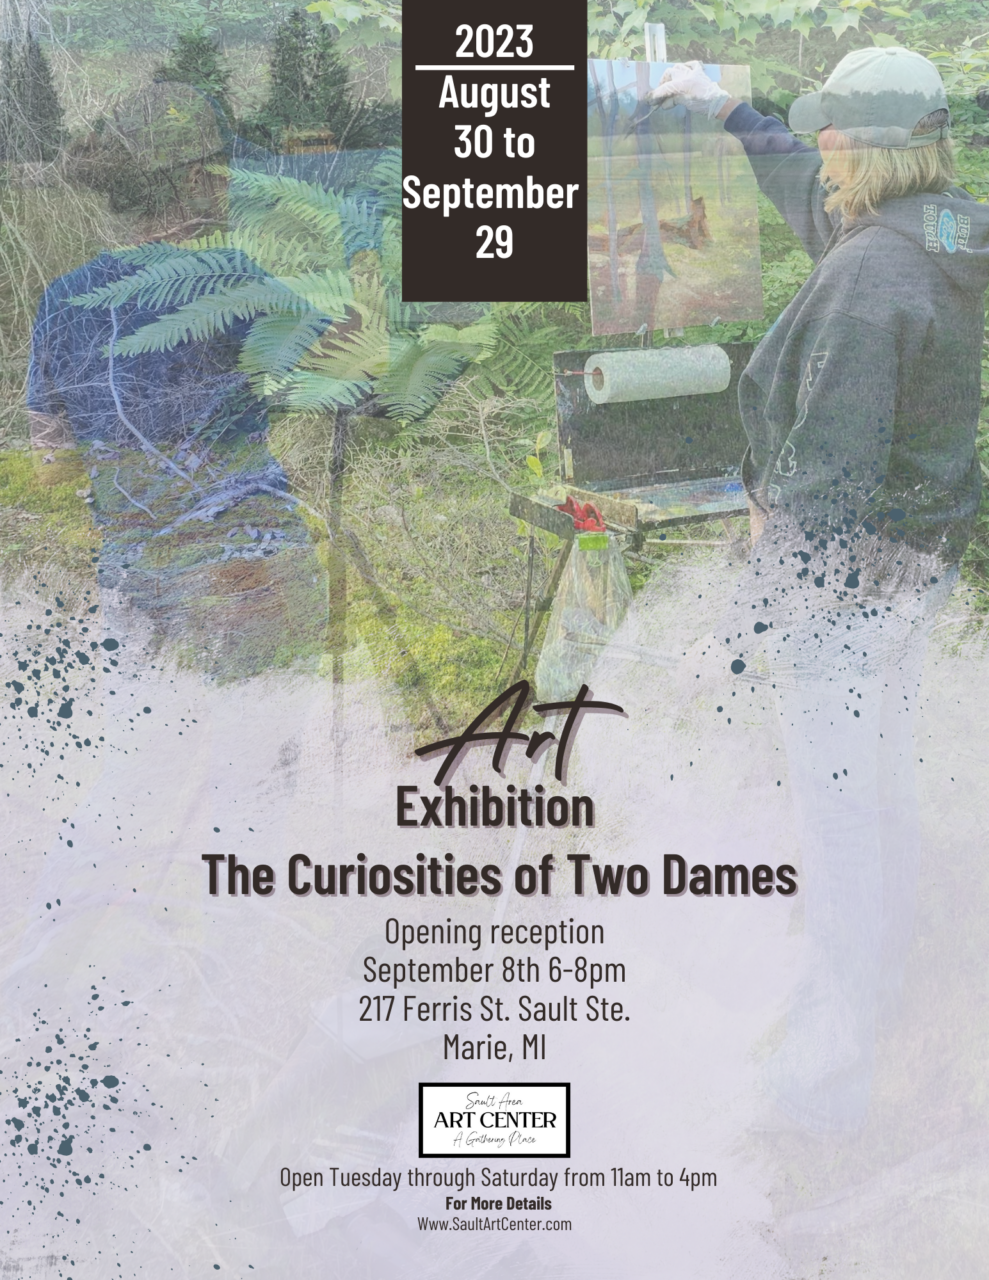 The Curiosities of Two Dames Art Exhibition Opening Reception